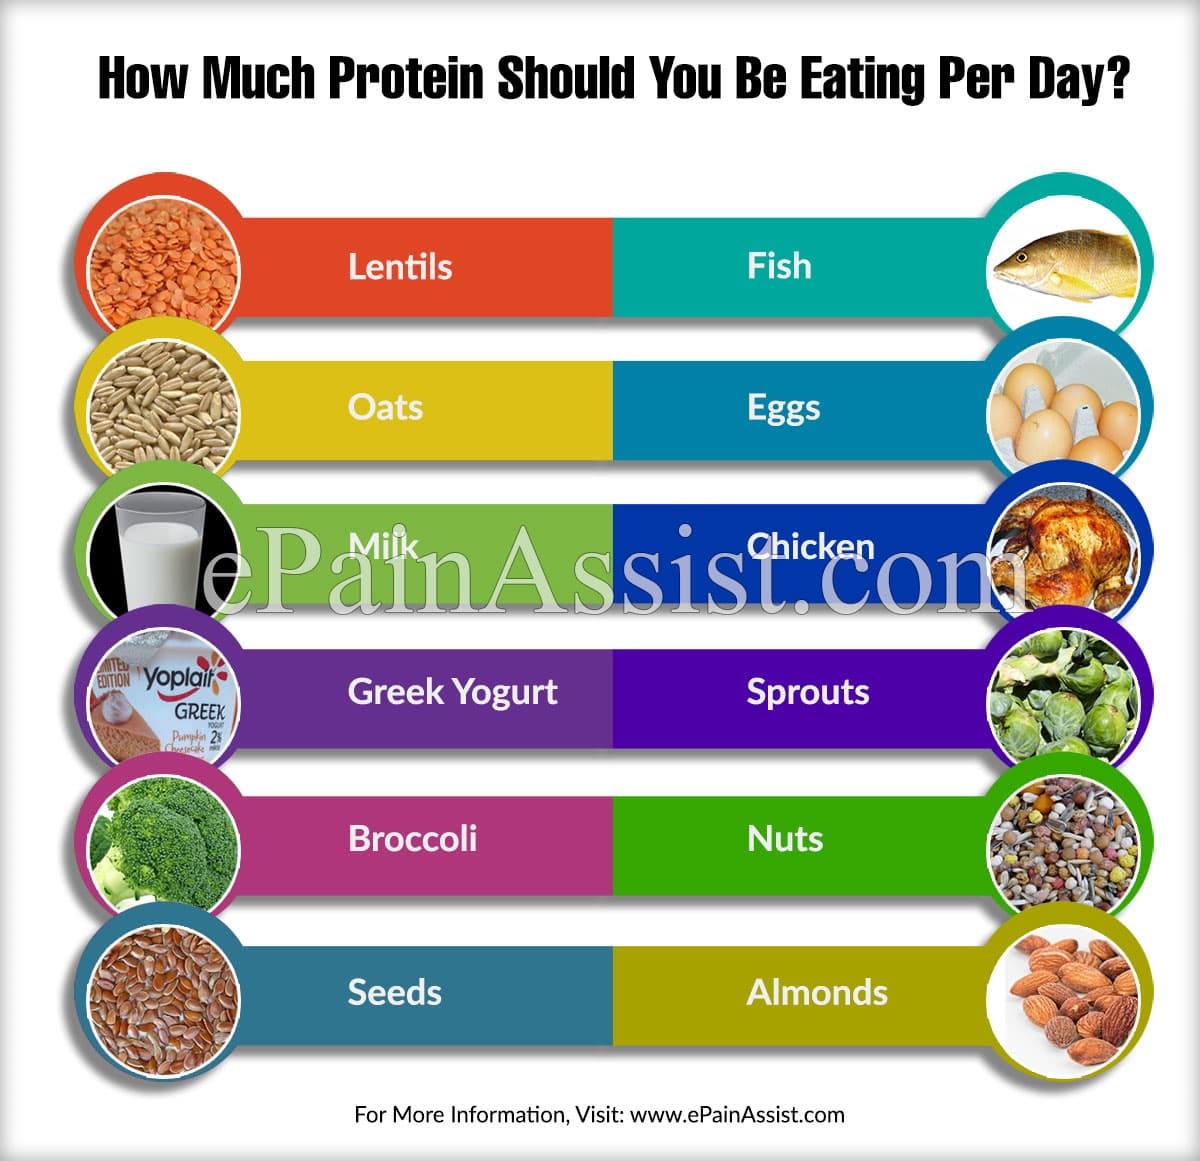 5 Ways Protein Could Improve Your Diet | by Weight loss tips | Medium